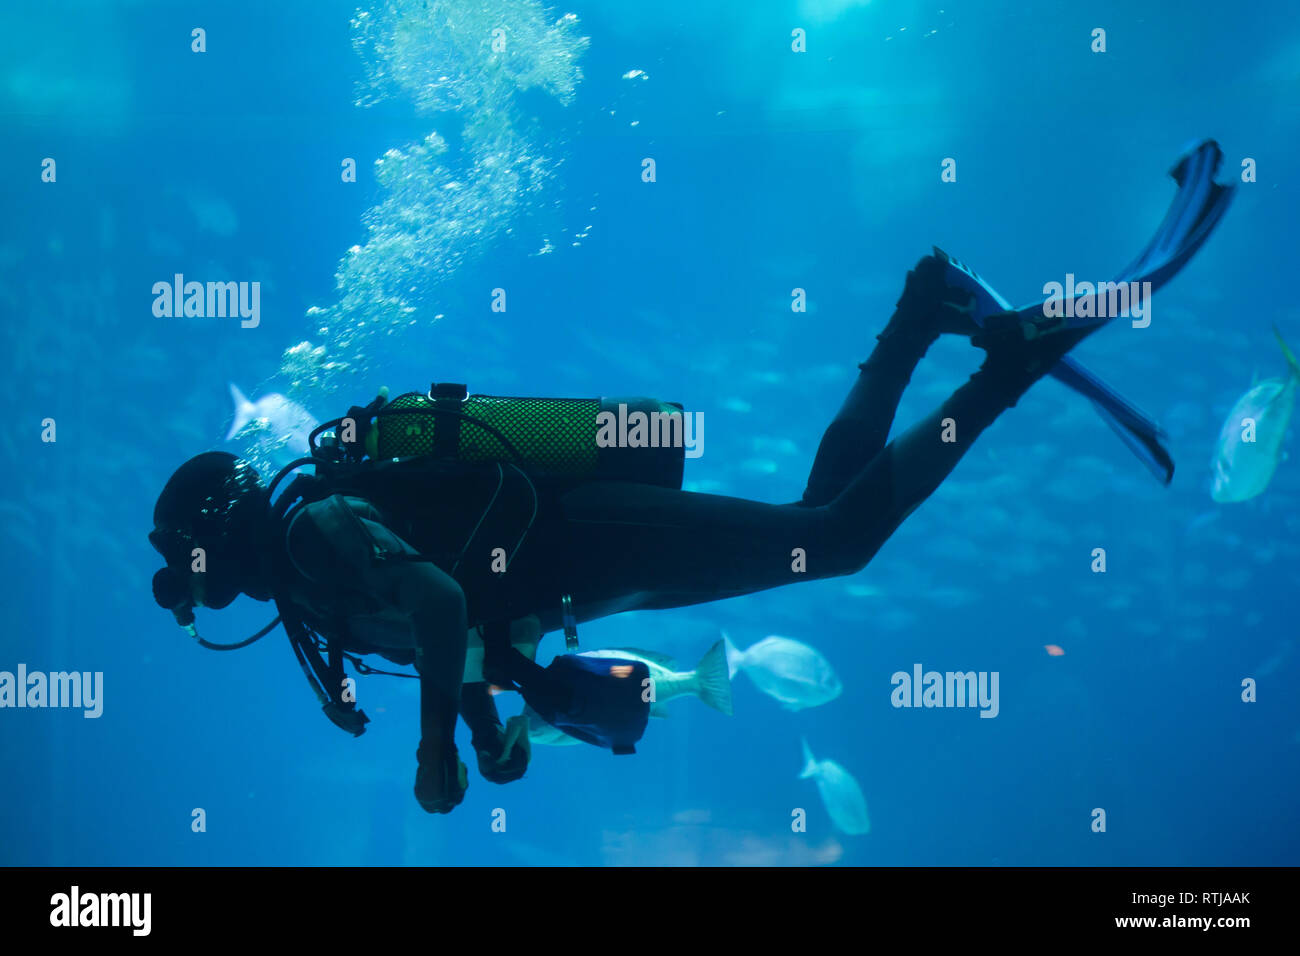 Diver diving with a scuba set in the sea. Stock Photo